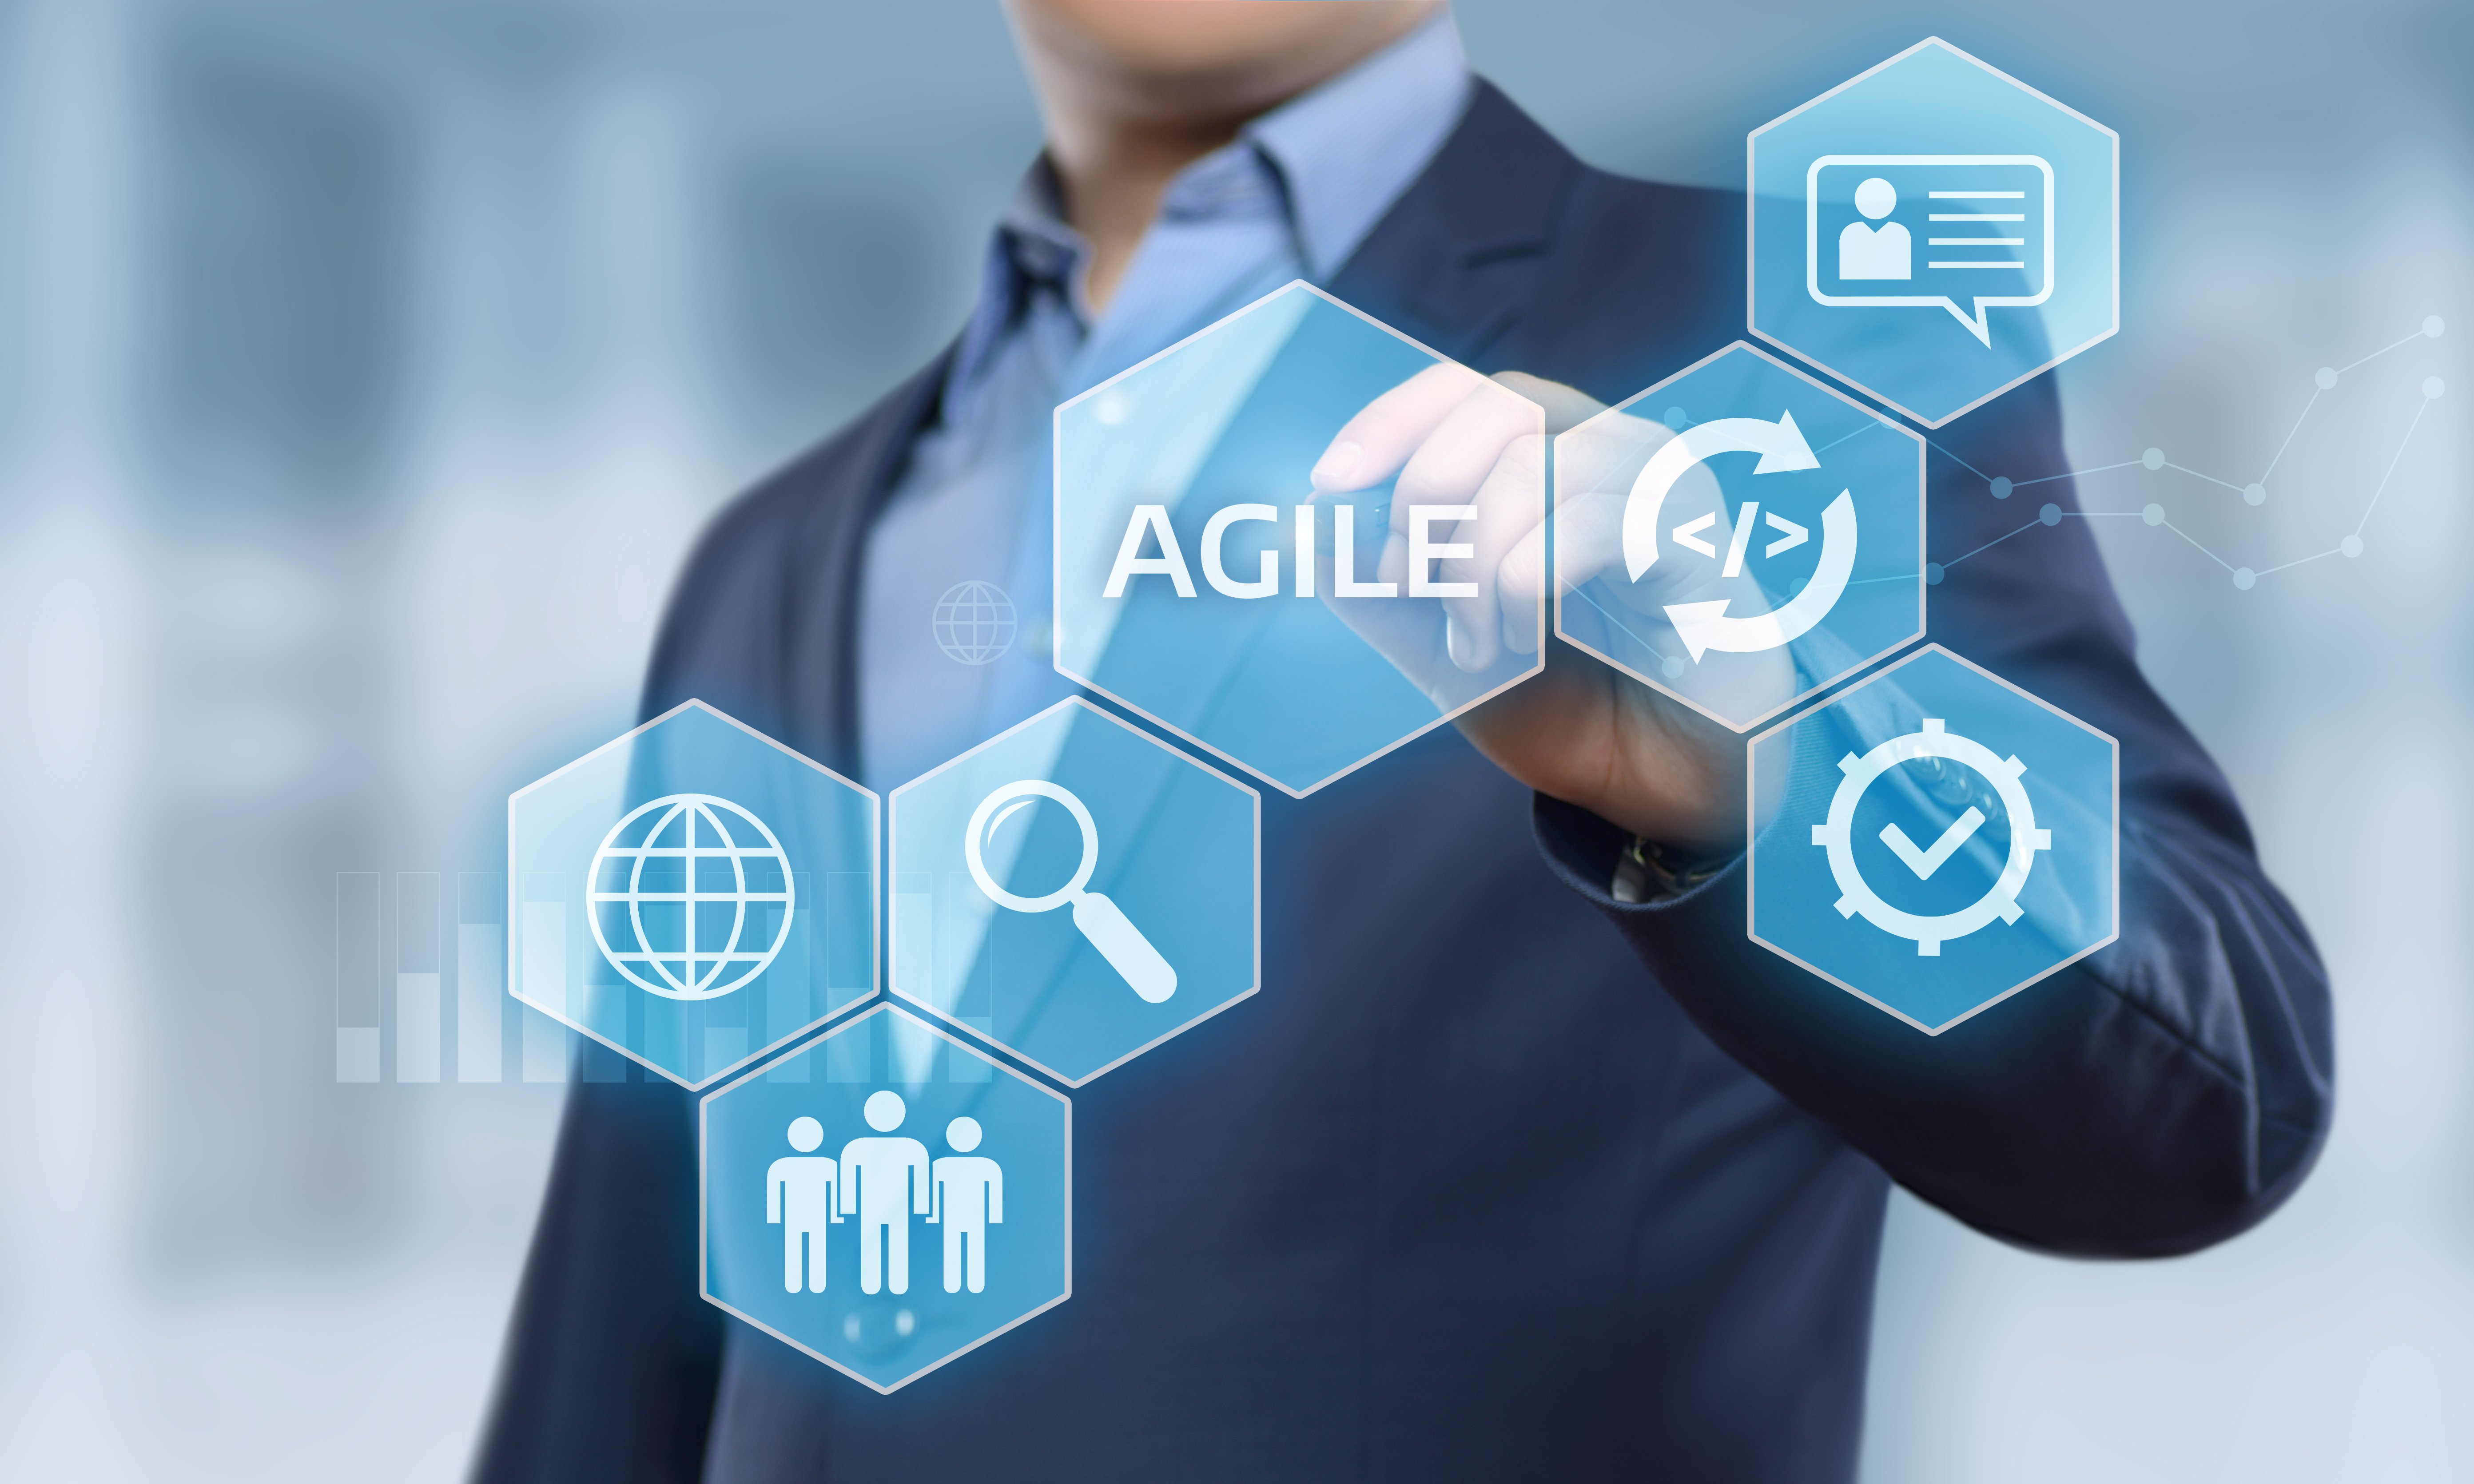 Business Agility 101: “Mobilizing” for success and flexibility